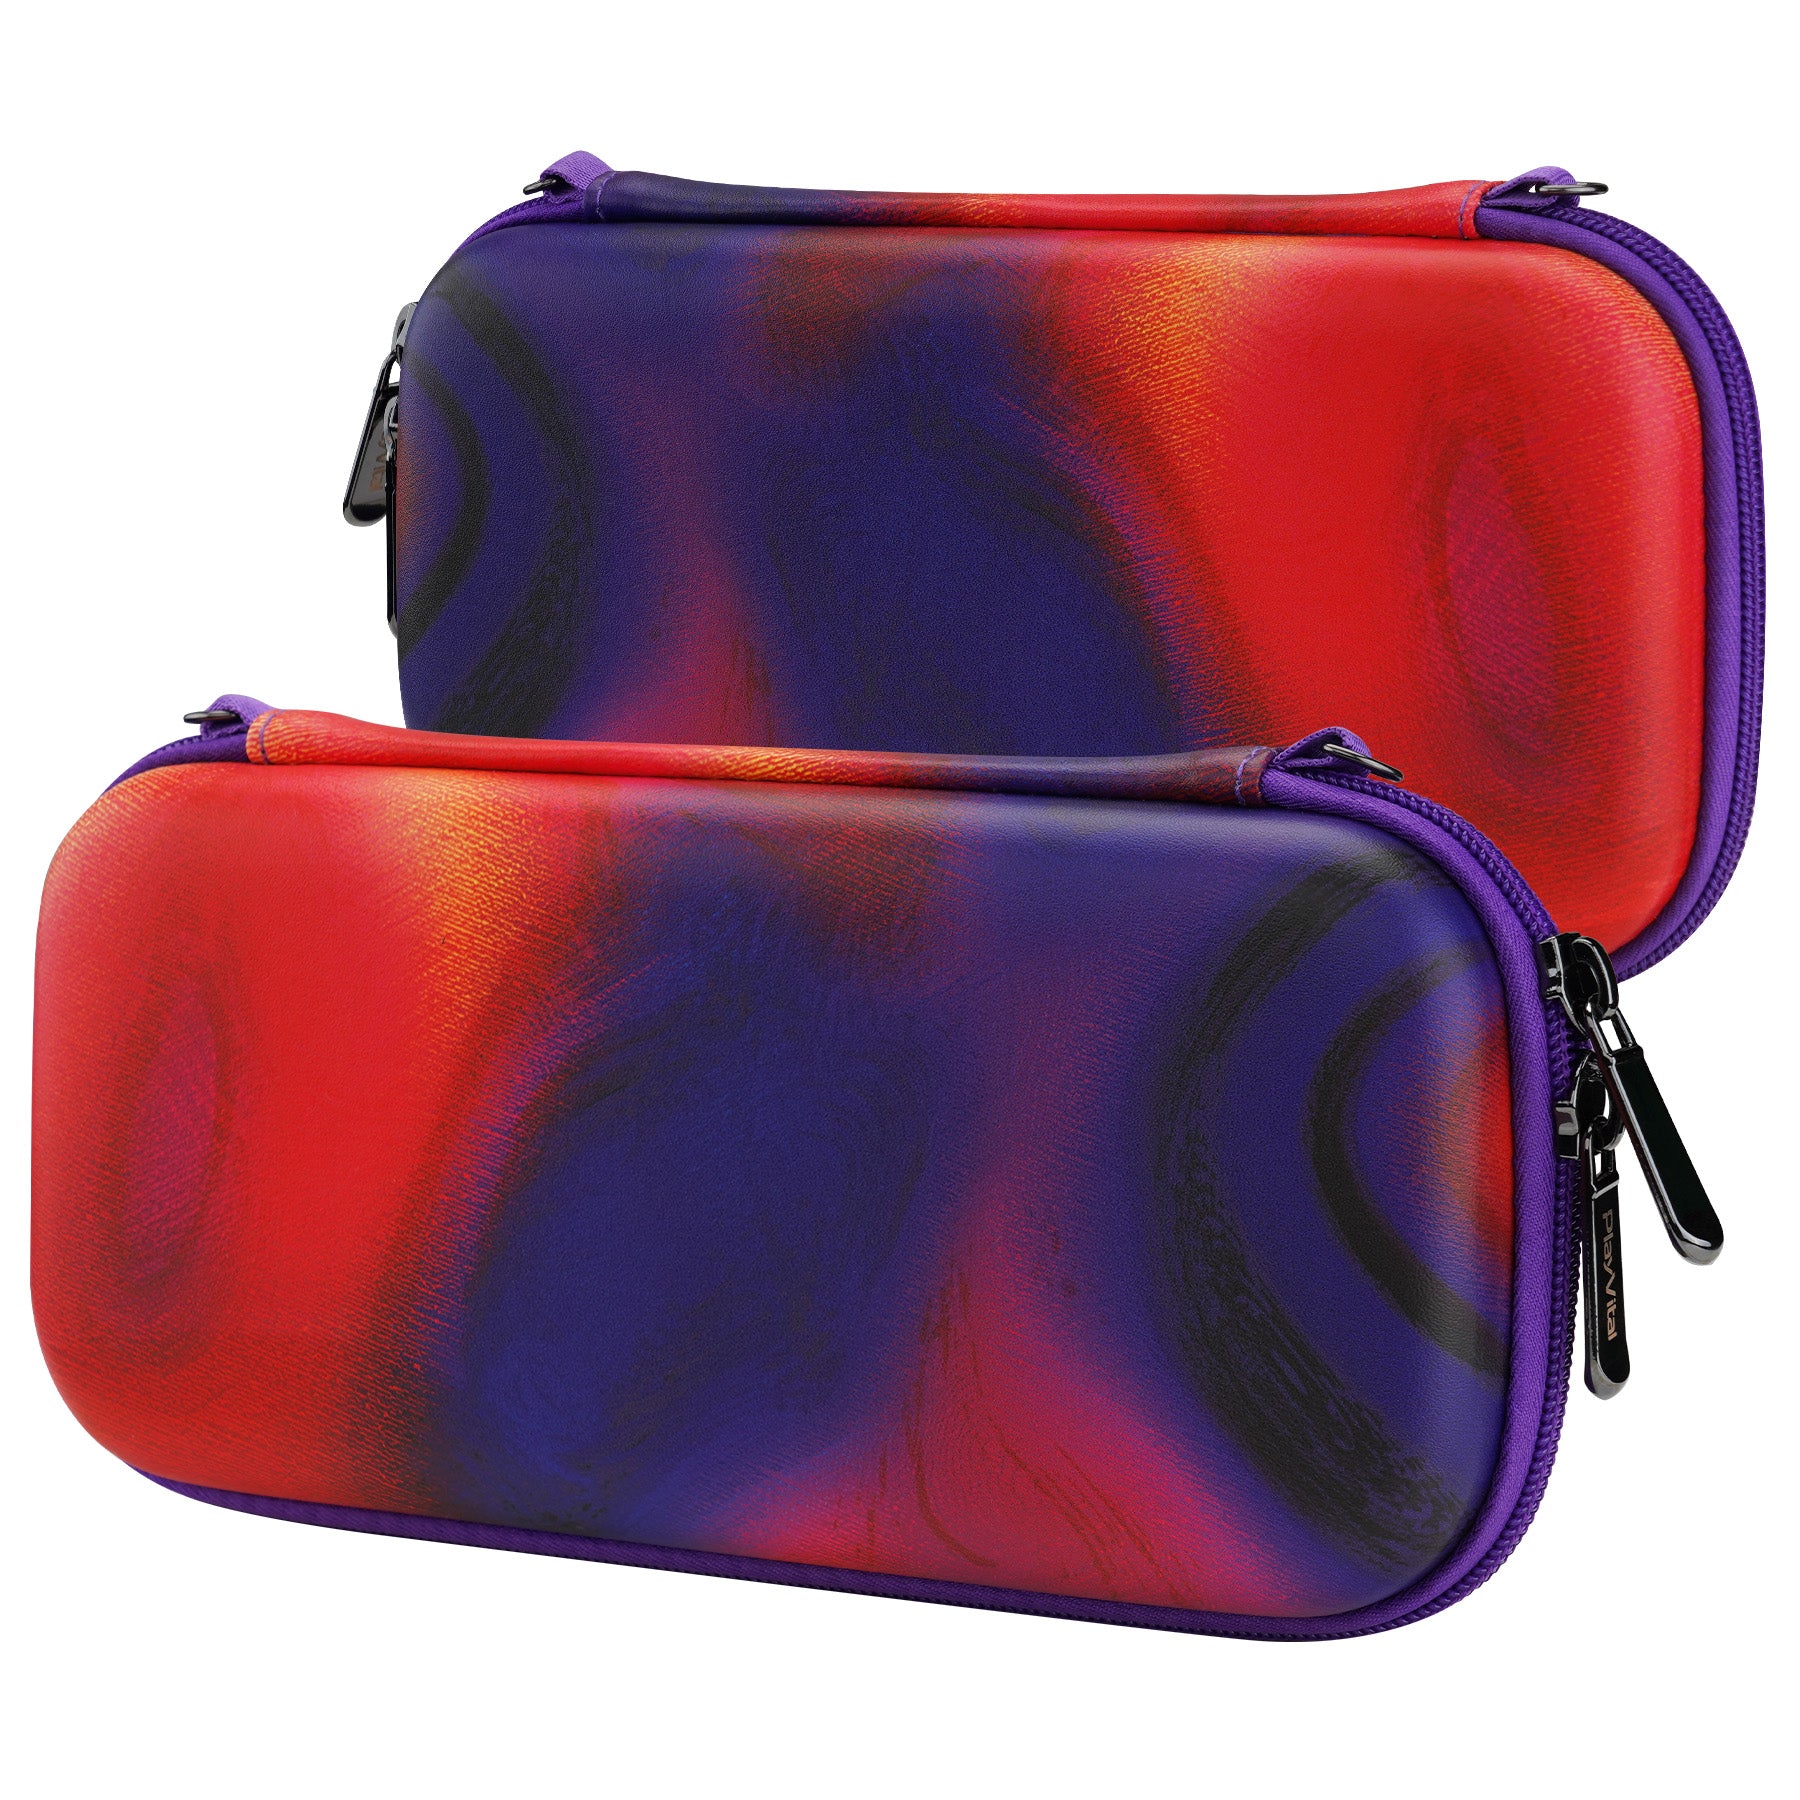 PlayVital Pink Switch Lite Travel Carrying Case, Portable Pouch, Soft Velvet Lining Storage Bag for NS Switch Lite with Thumb Grips 8 Game Cards Slots Inner Pocket - Purple Red Swirl - LTW004 PlayVital